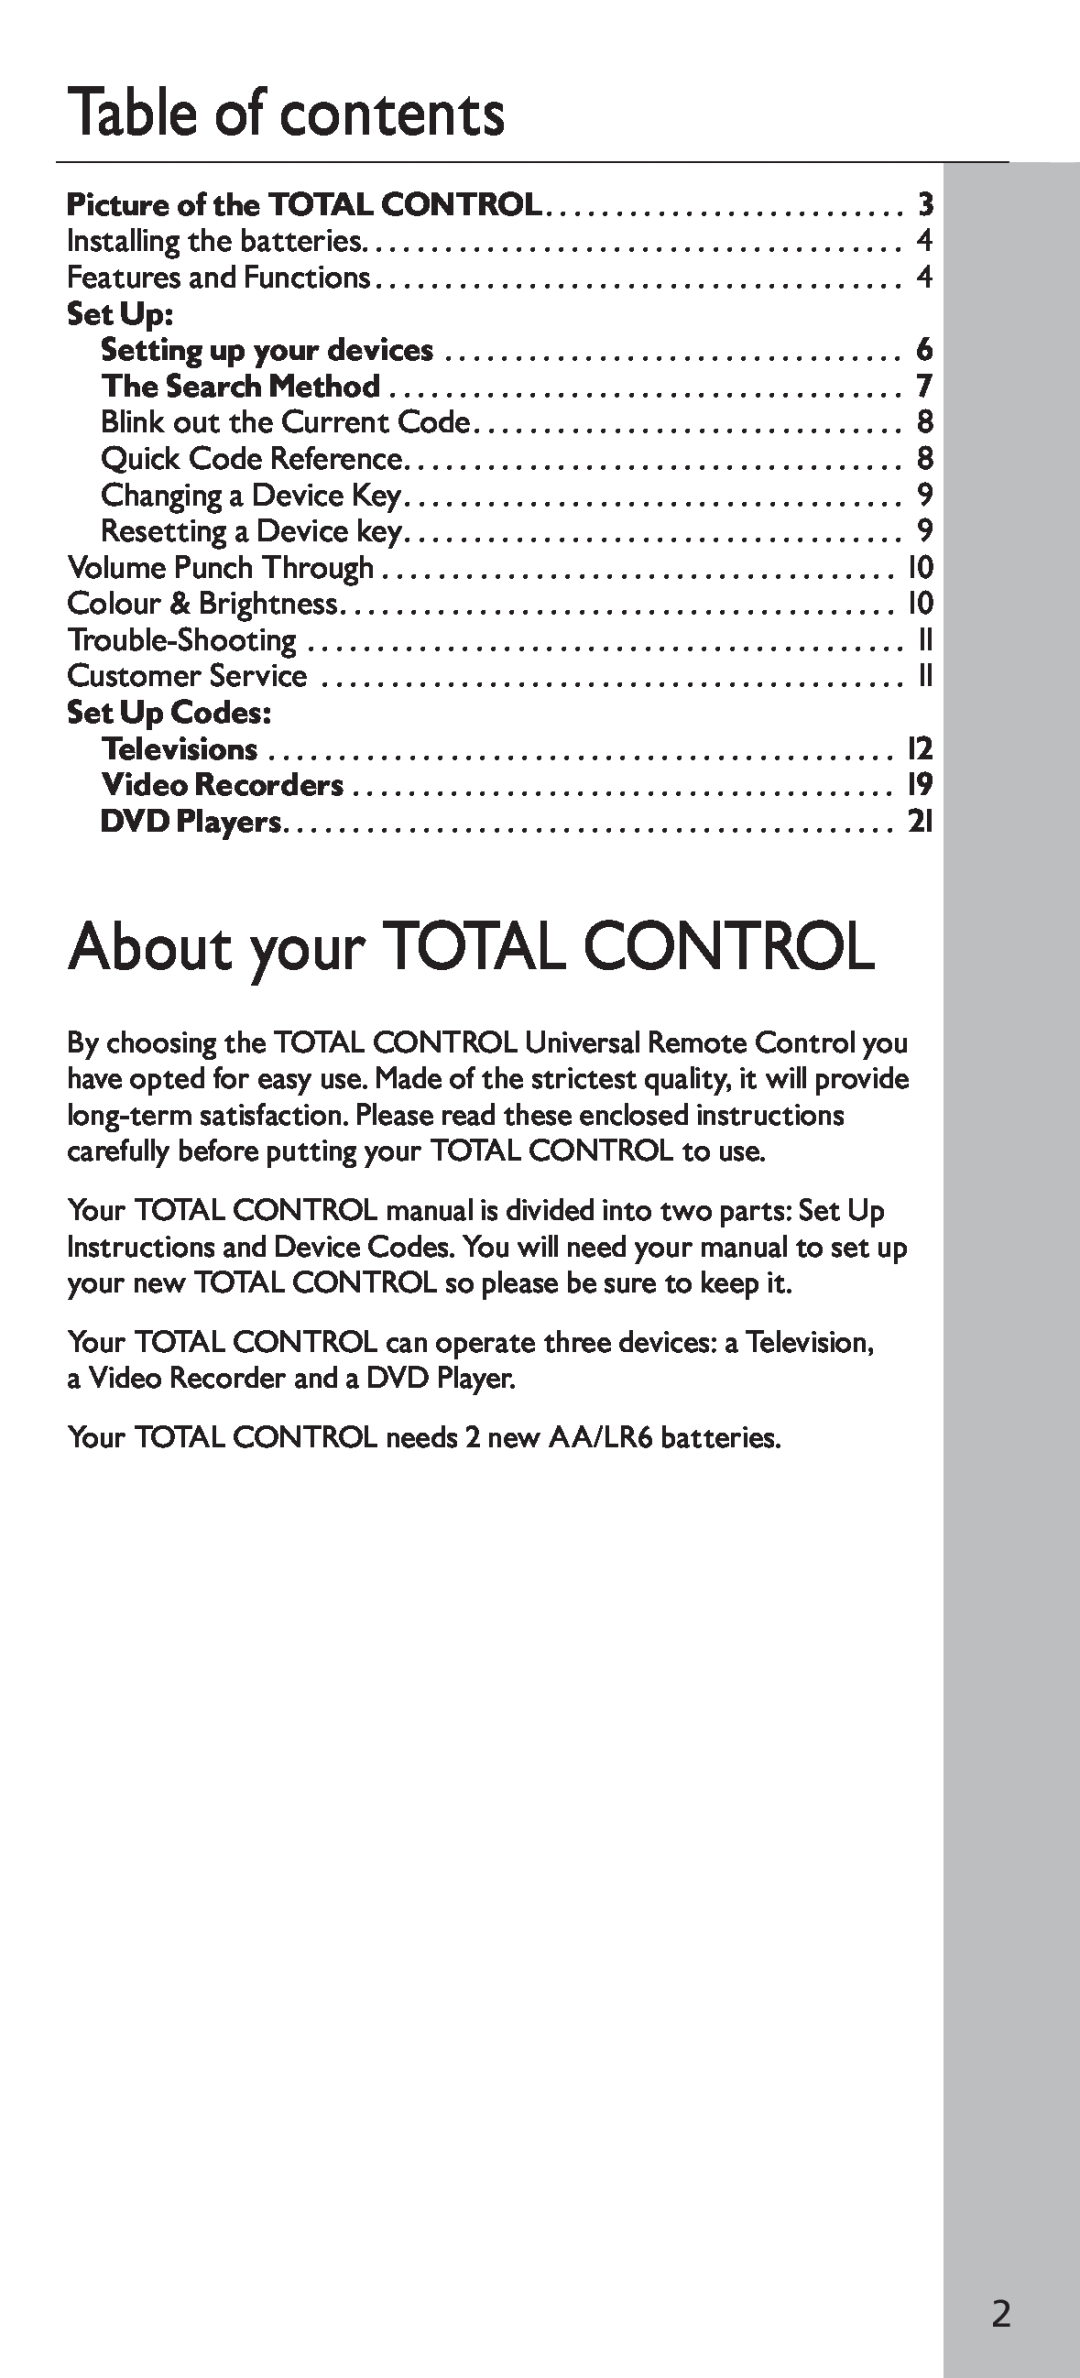 Universal Electronics URC - 4130 instruction manual Table of contents, About your TOTAL CONTROL, Set Up Codes 